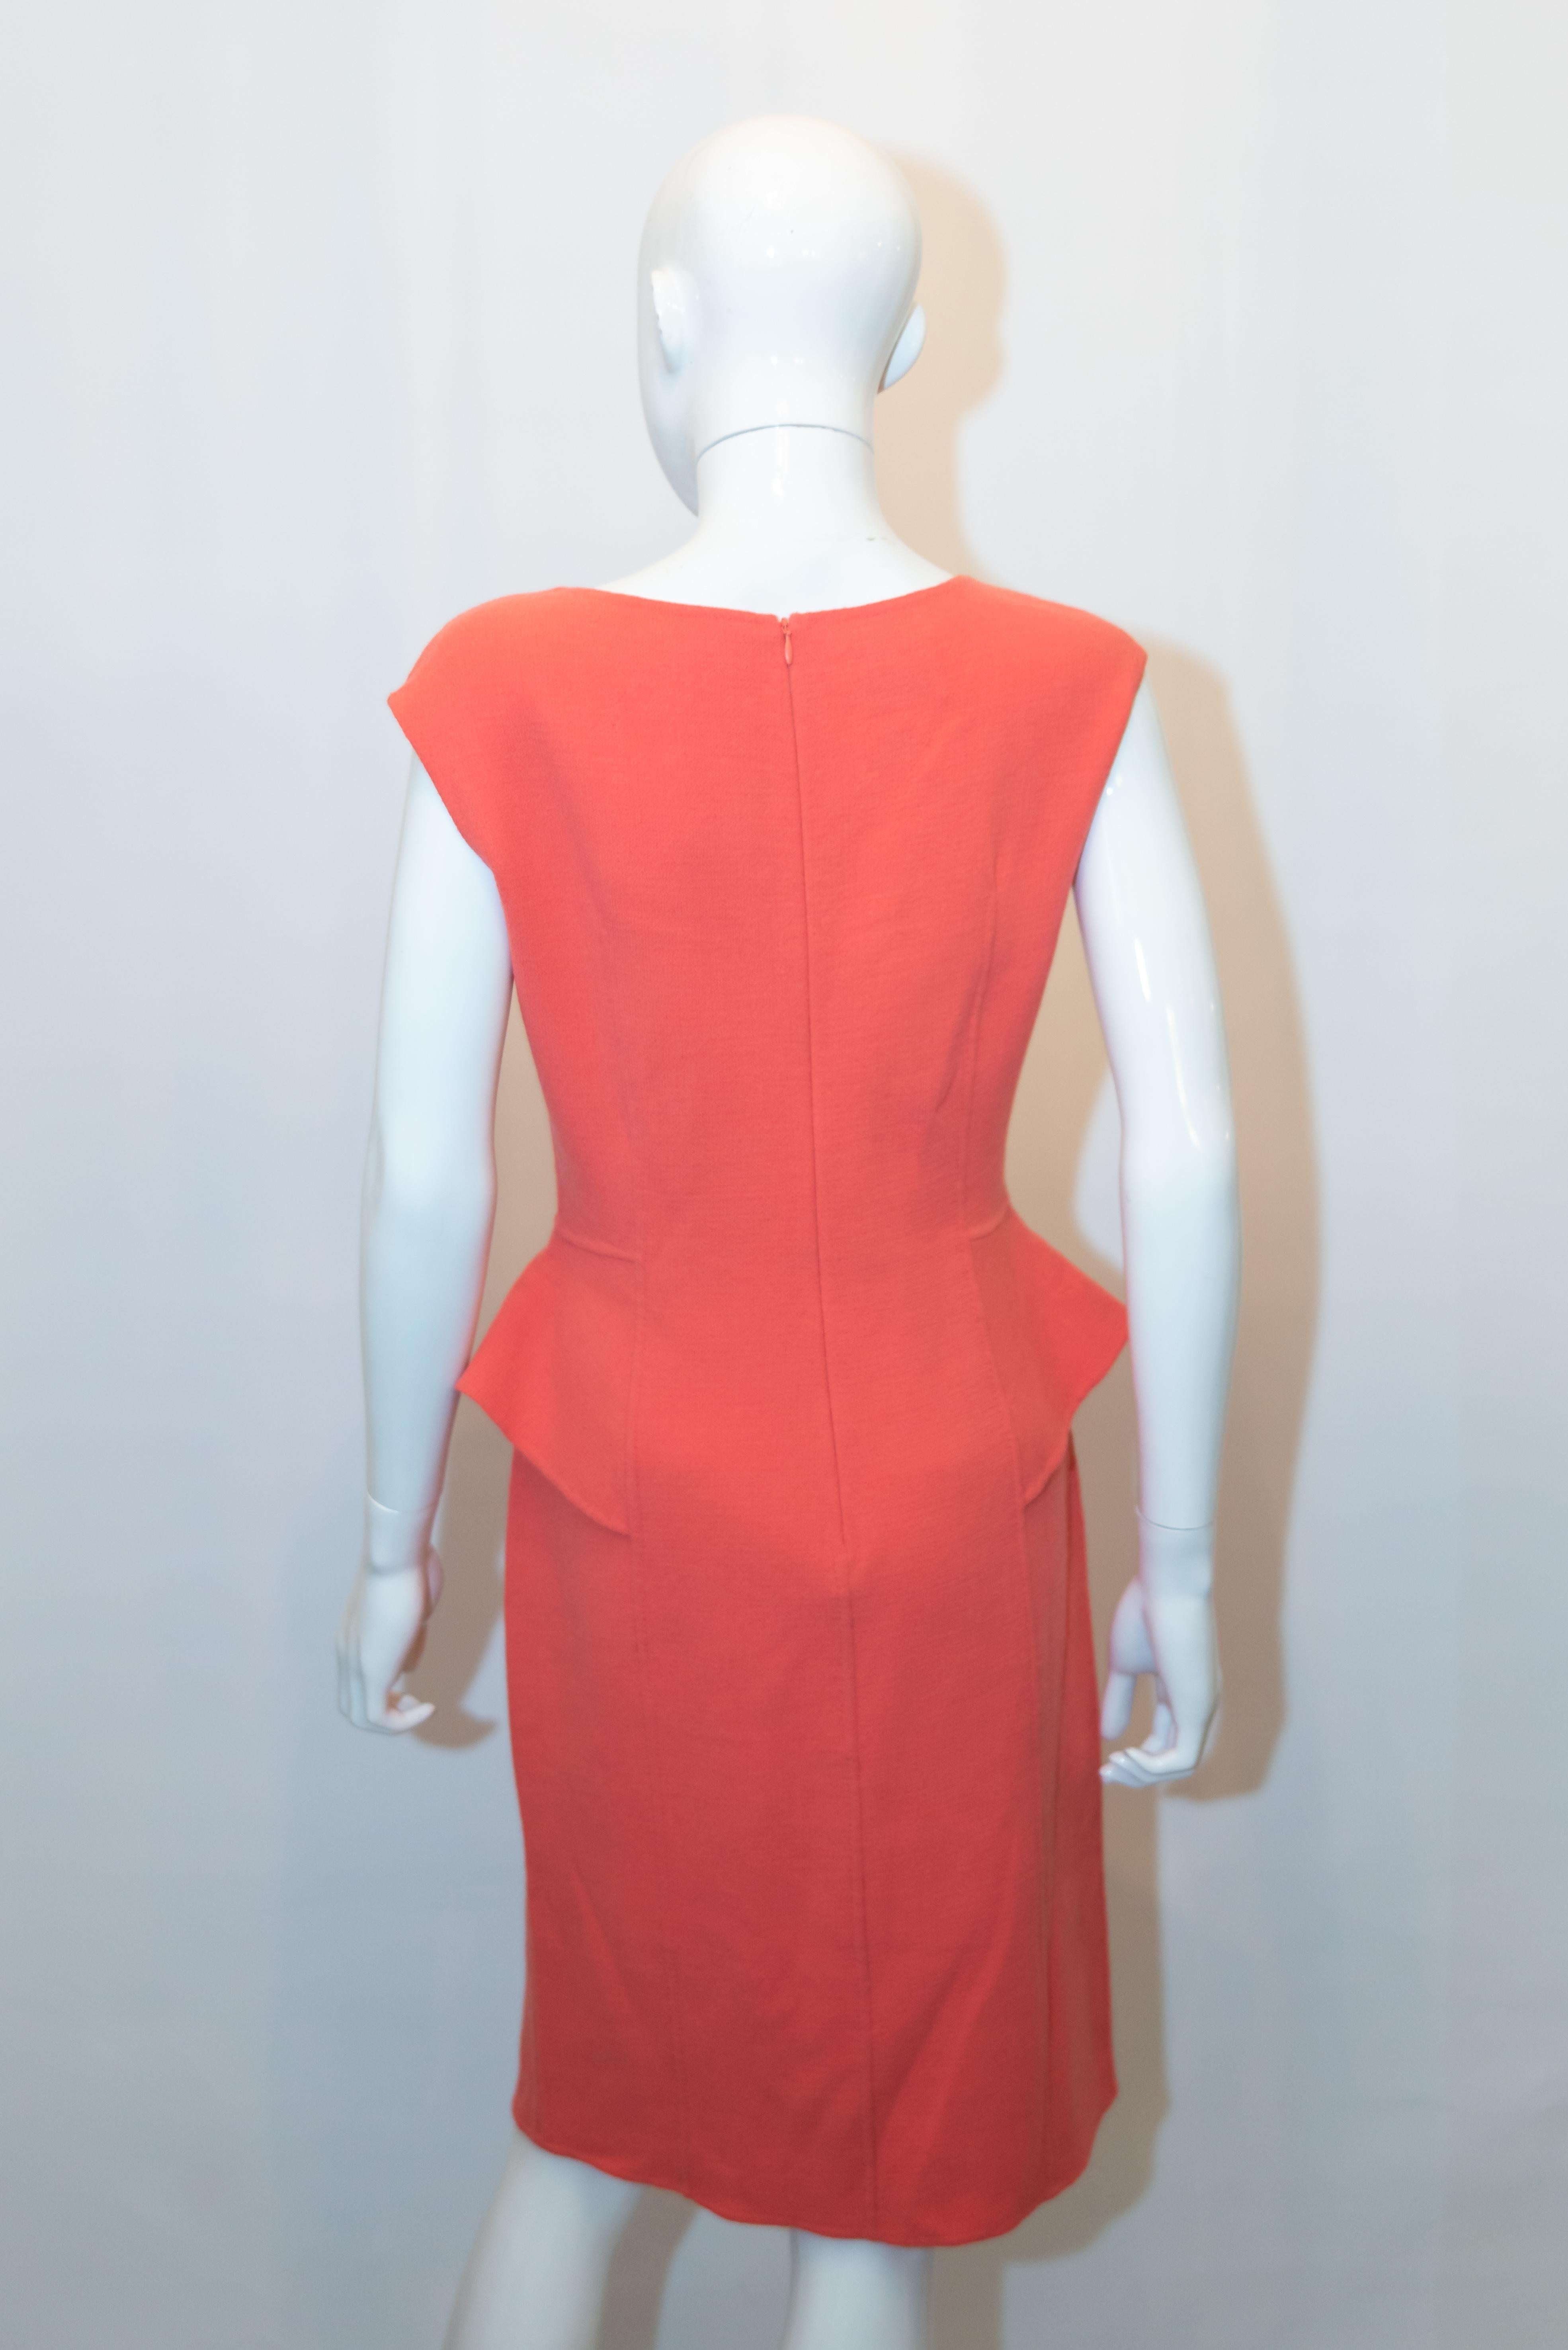 Armani Collezzioni Pink Dress with Peplum In Good Condition For Sale In London, GB